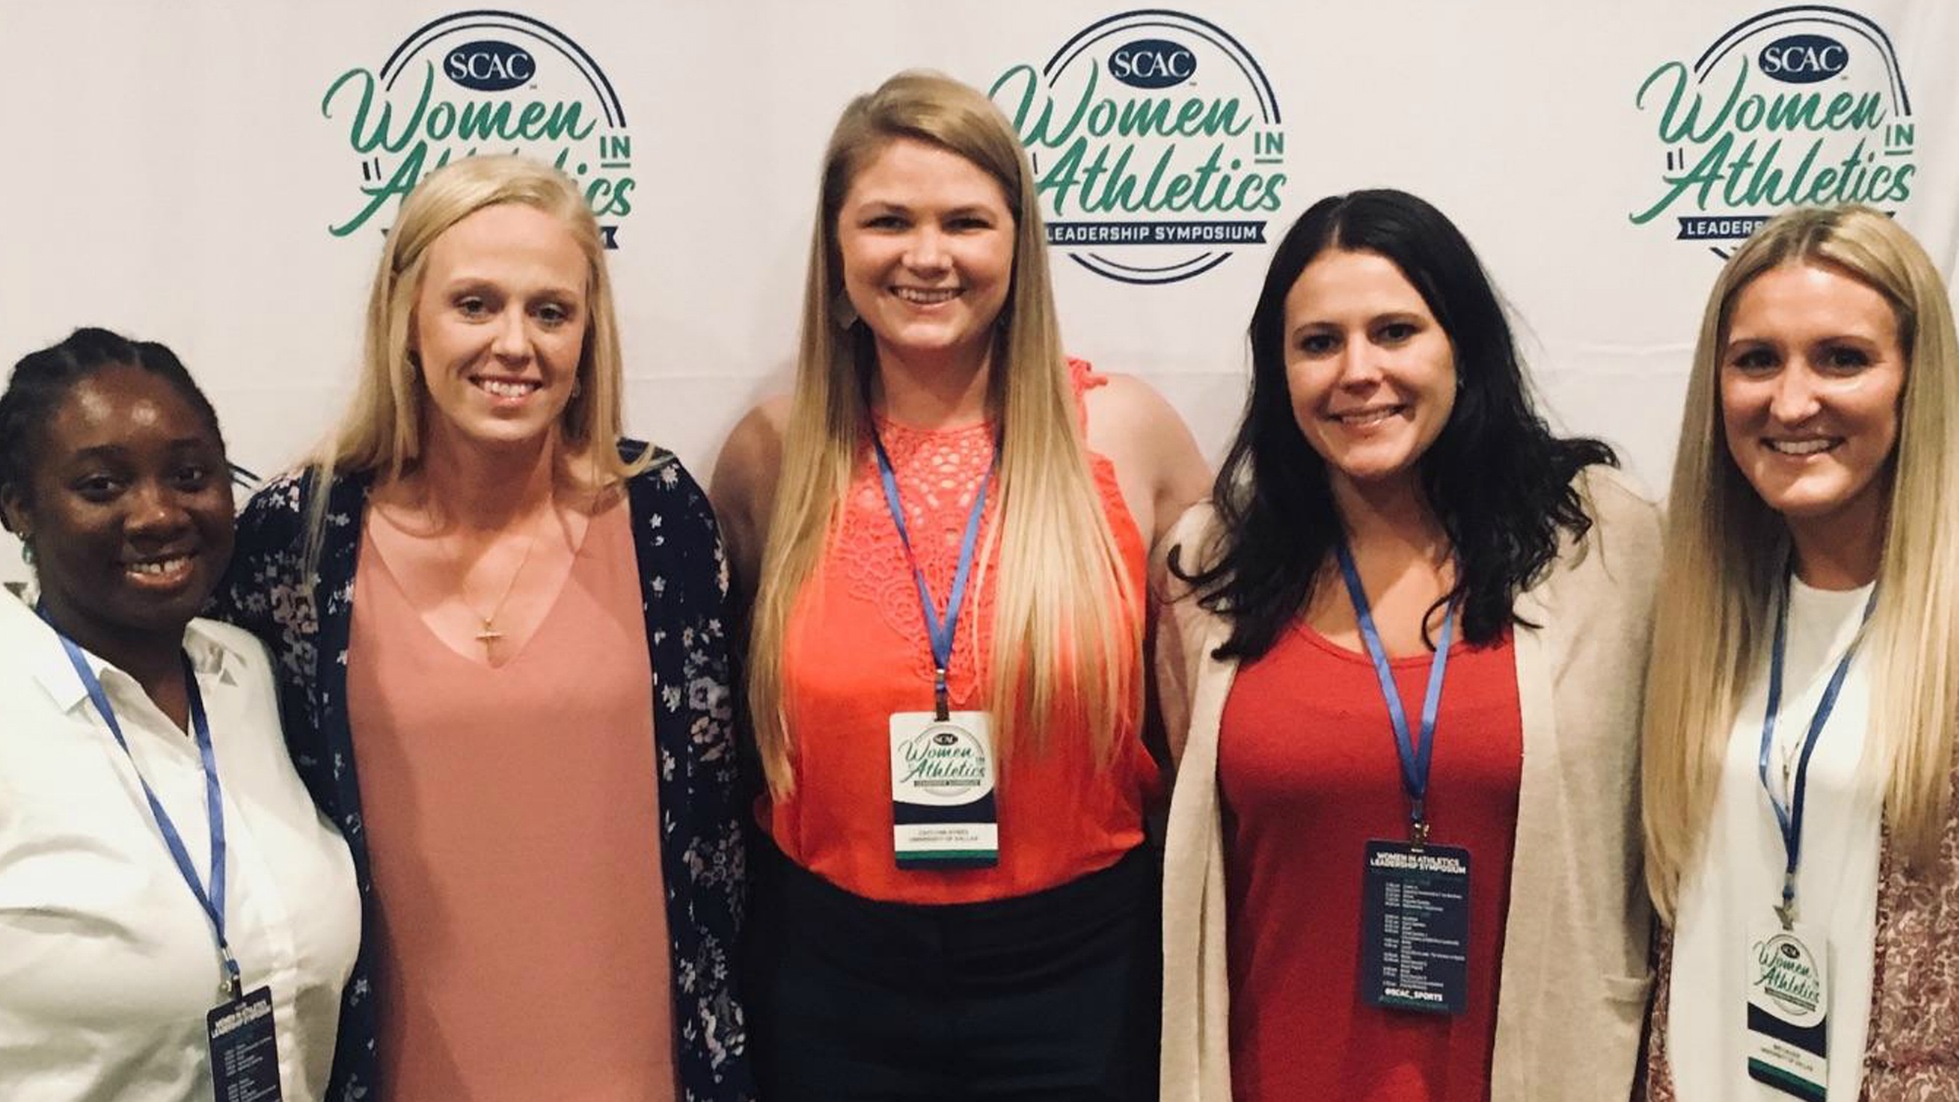 Five UD Coaches Attend Inaugural Women in Athletics Leadership Symposium